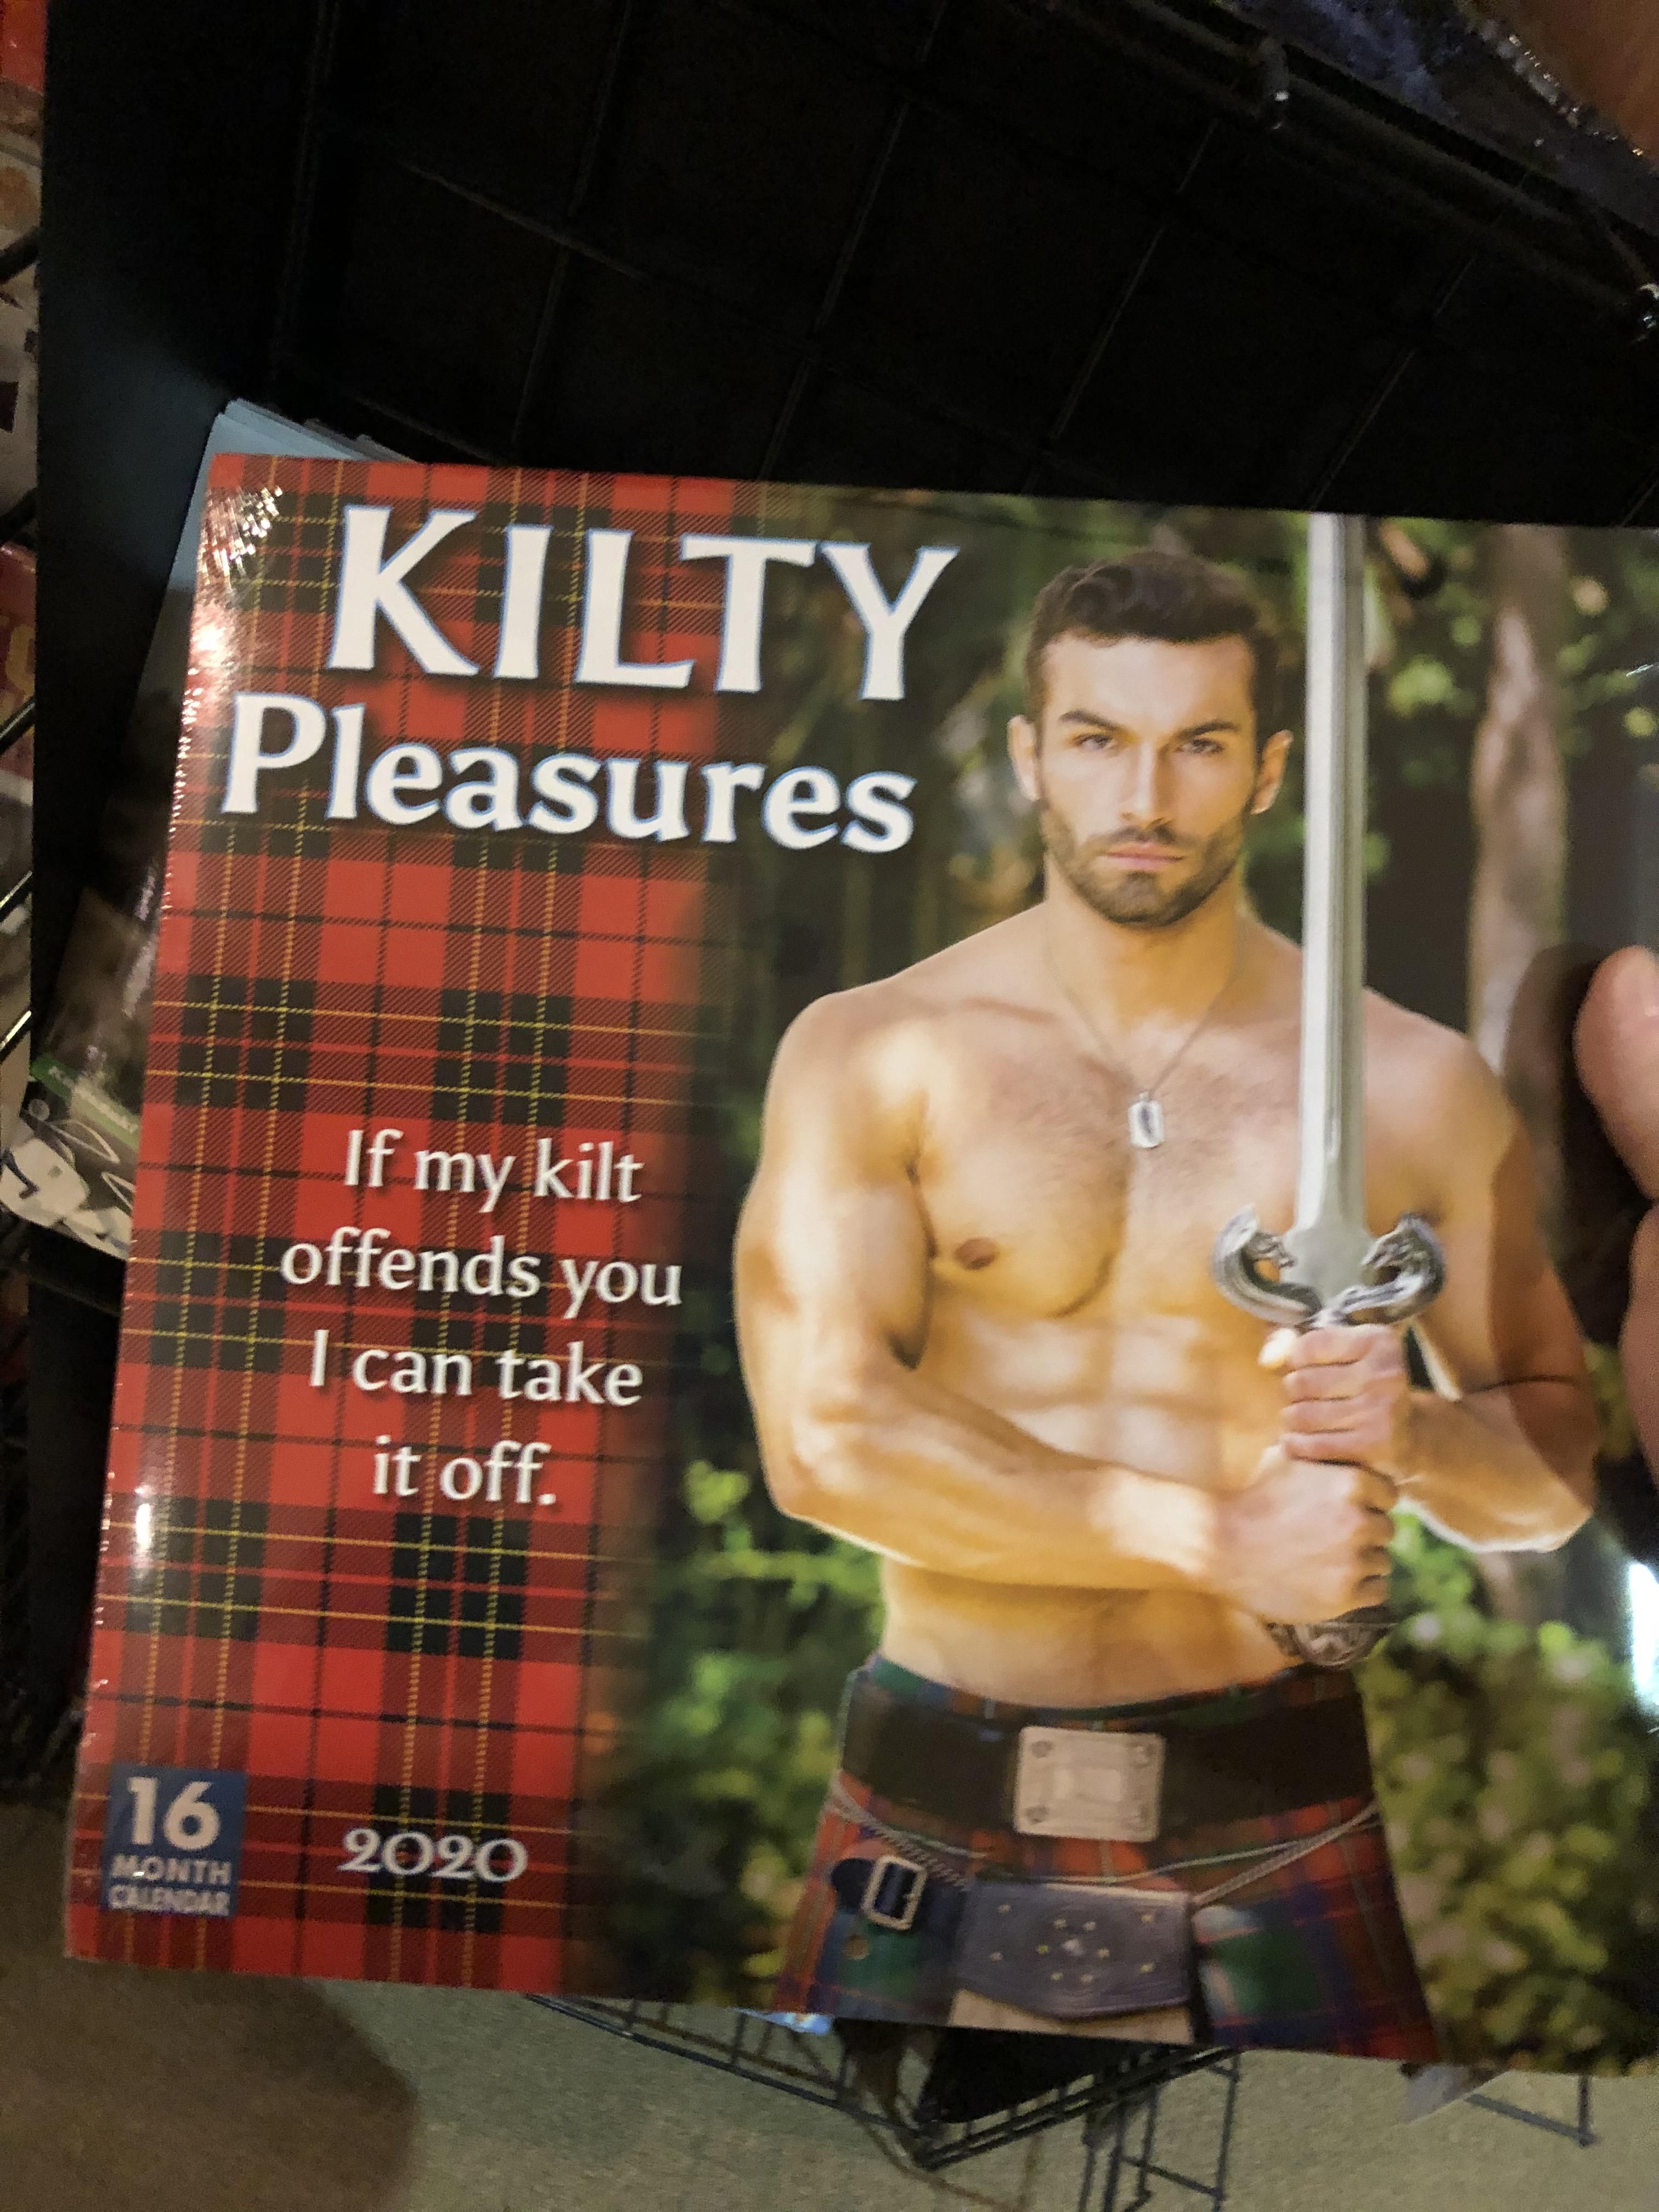 If my kilt offends you ;)